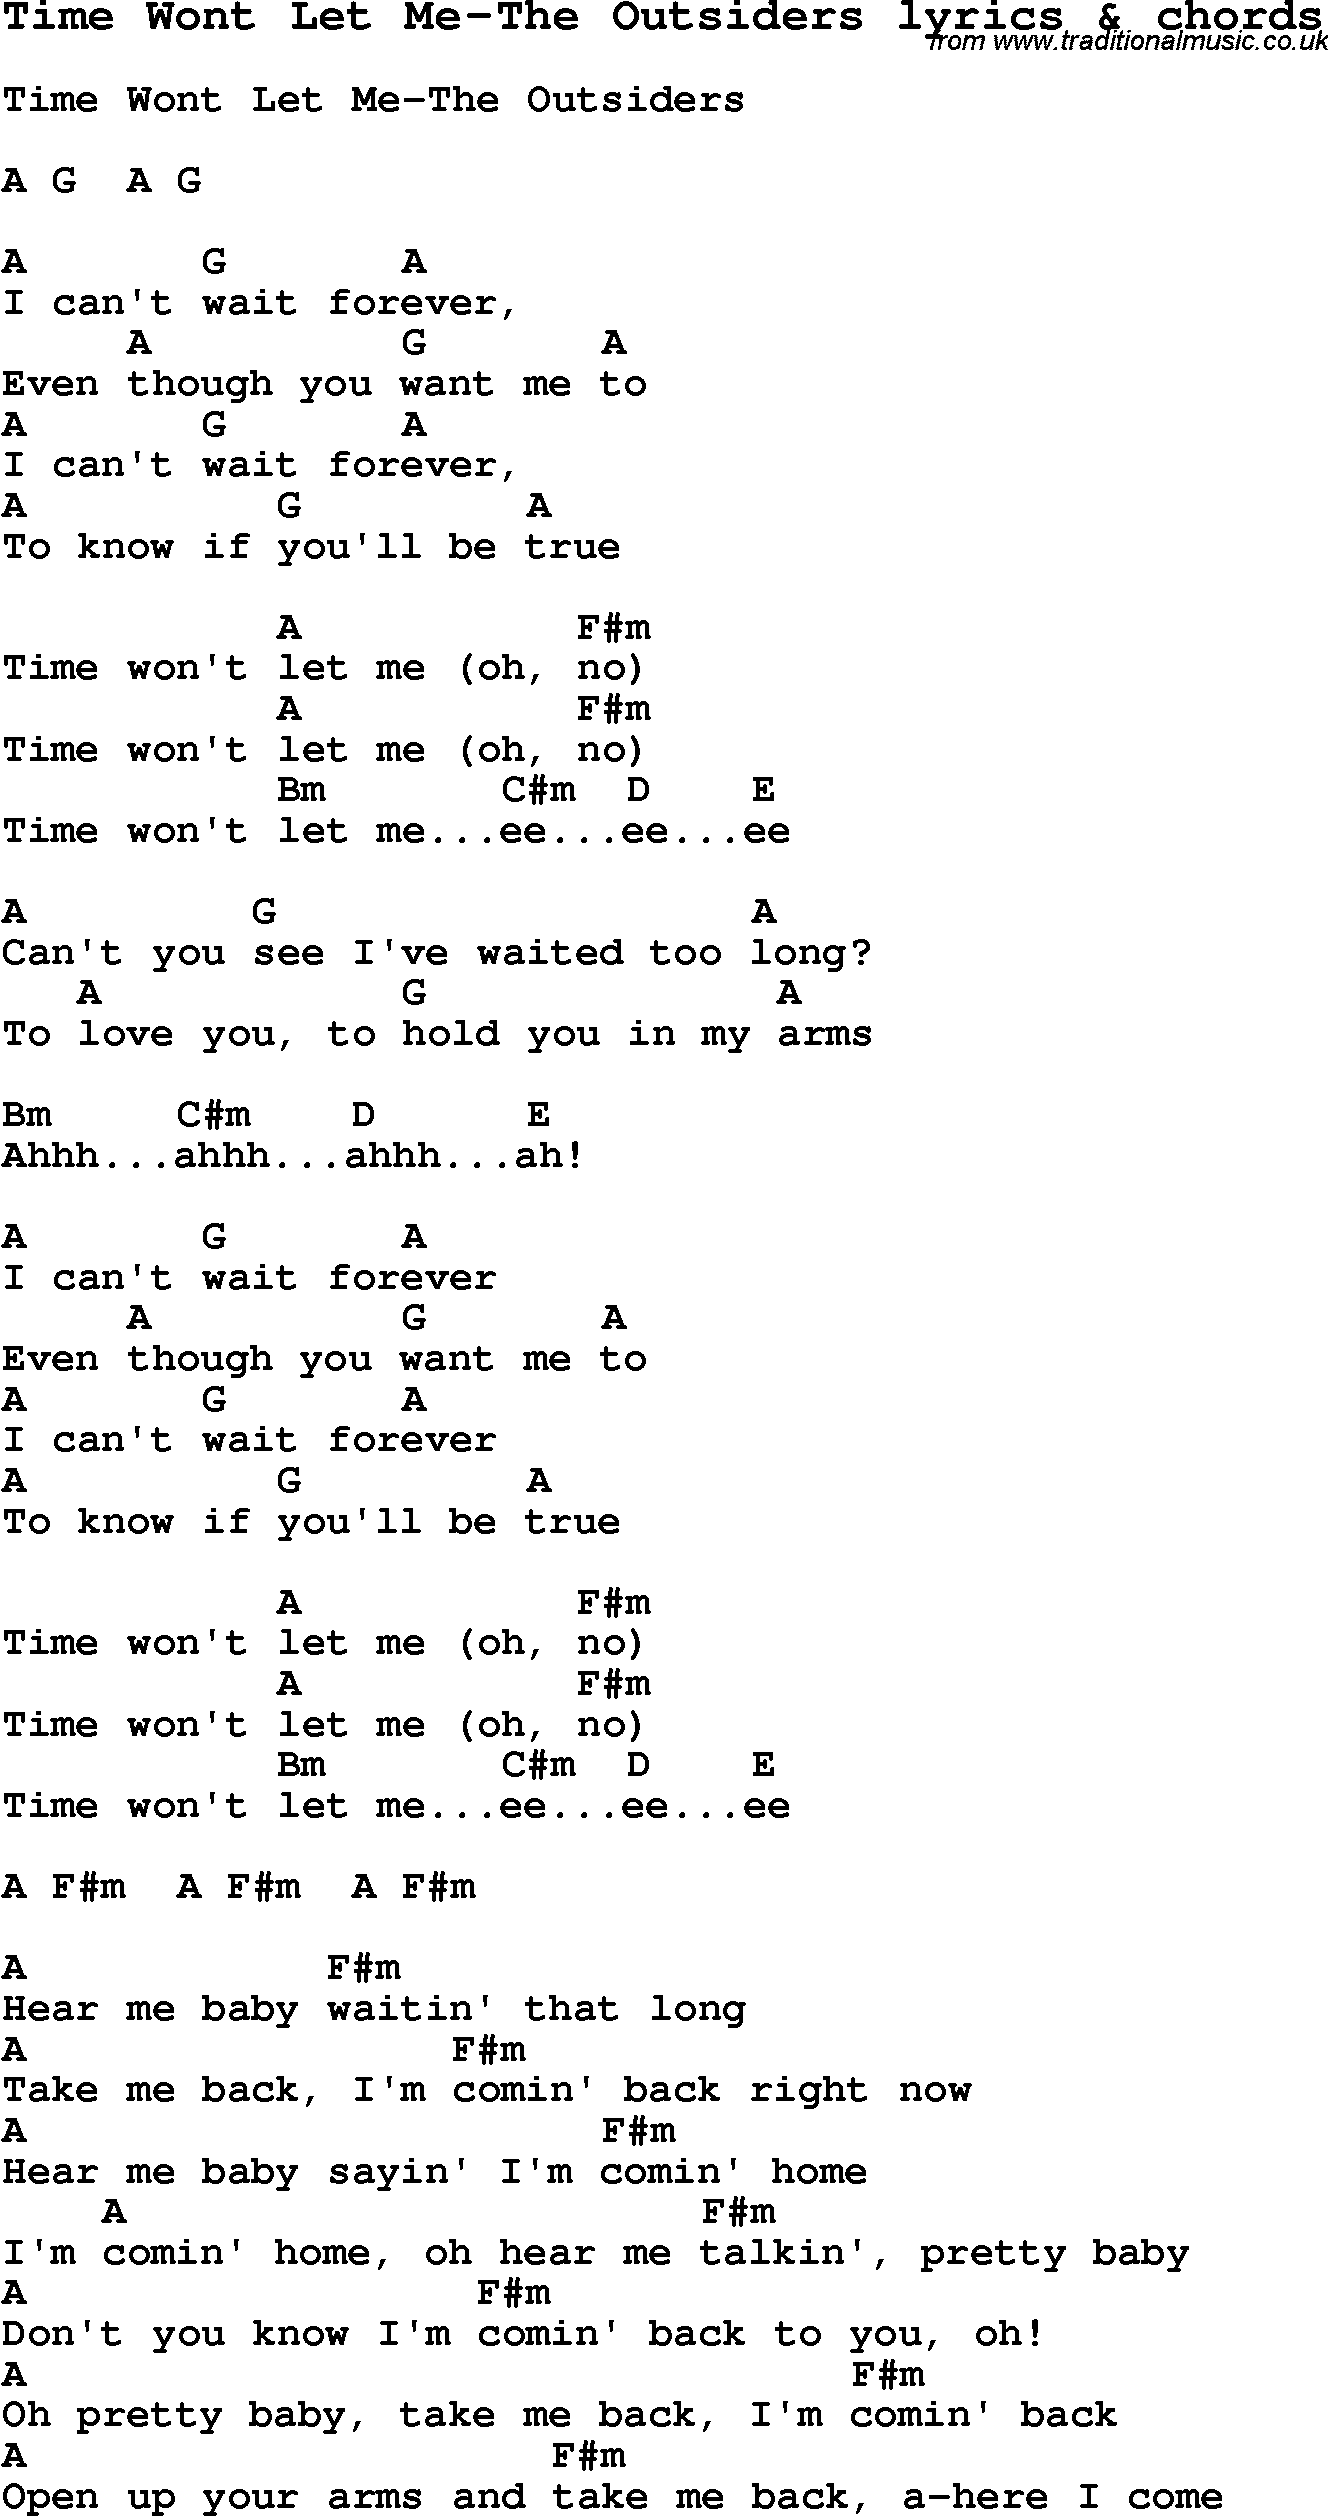 Love Song Lyrics for: Time Wont Let Me-The Outsiders with chords for Ukulele, Guitar Banjo etc.